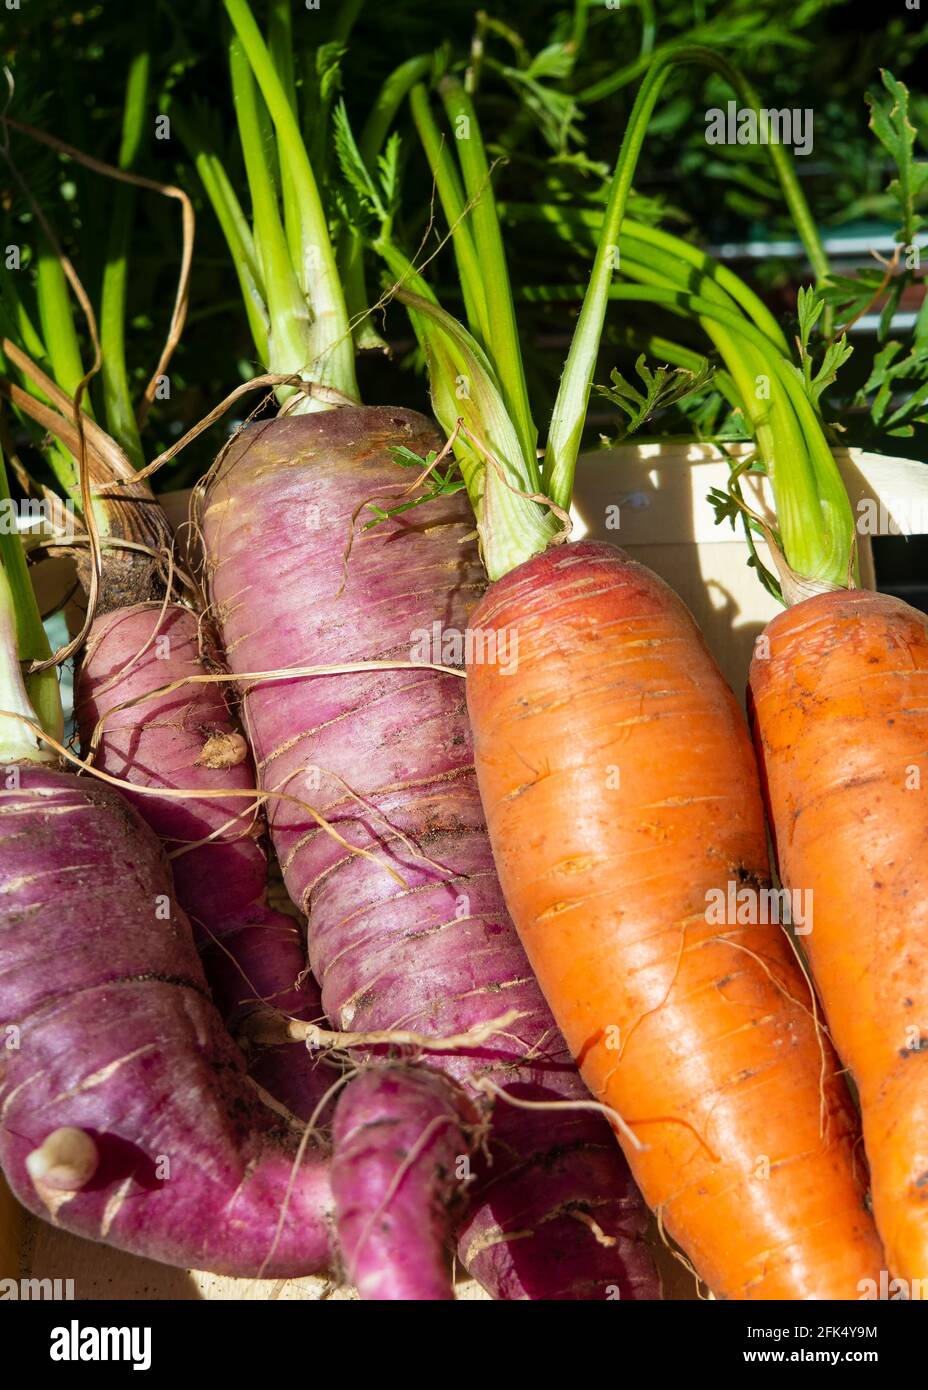 Carrots ready to be harvested in the garden Stock Photo